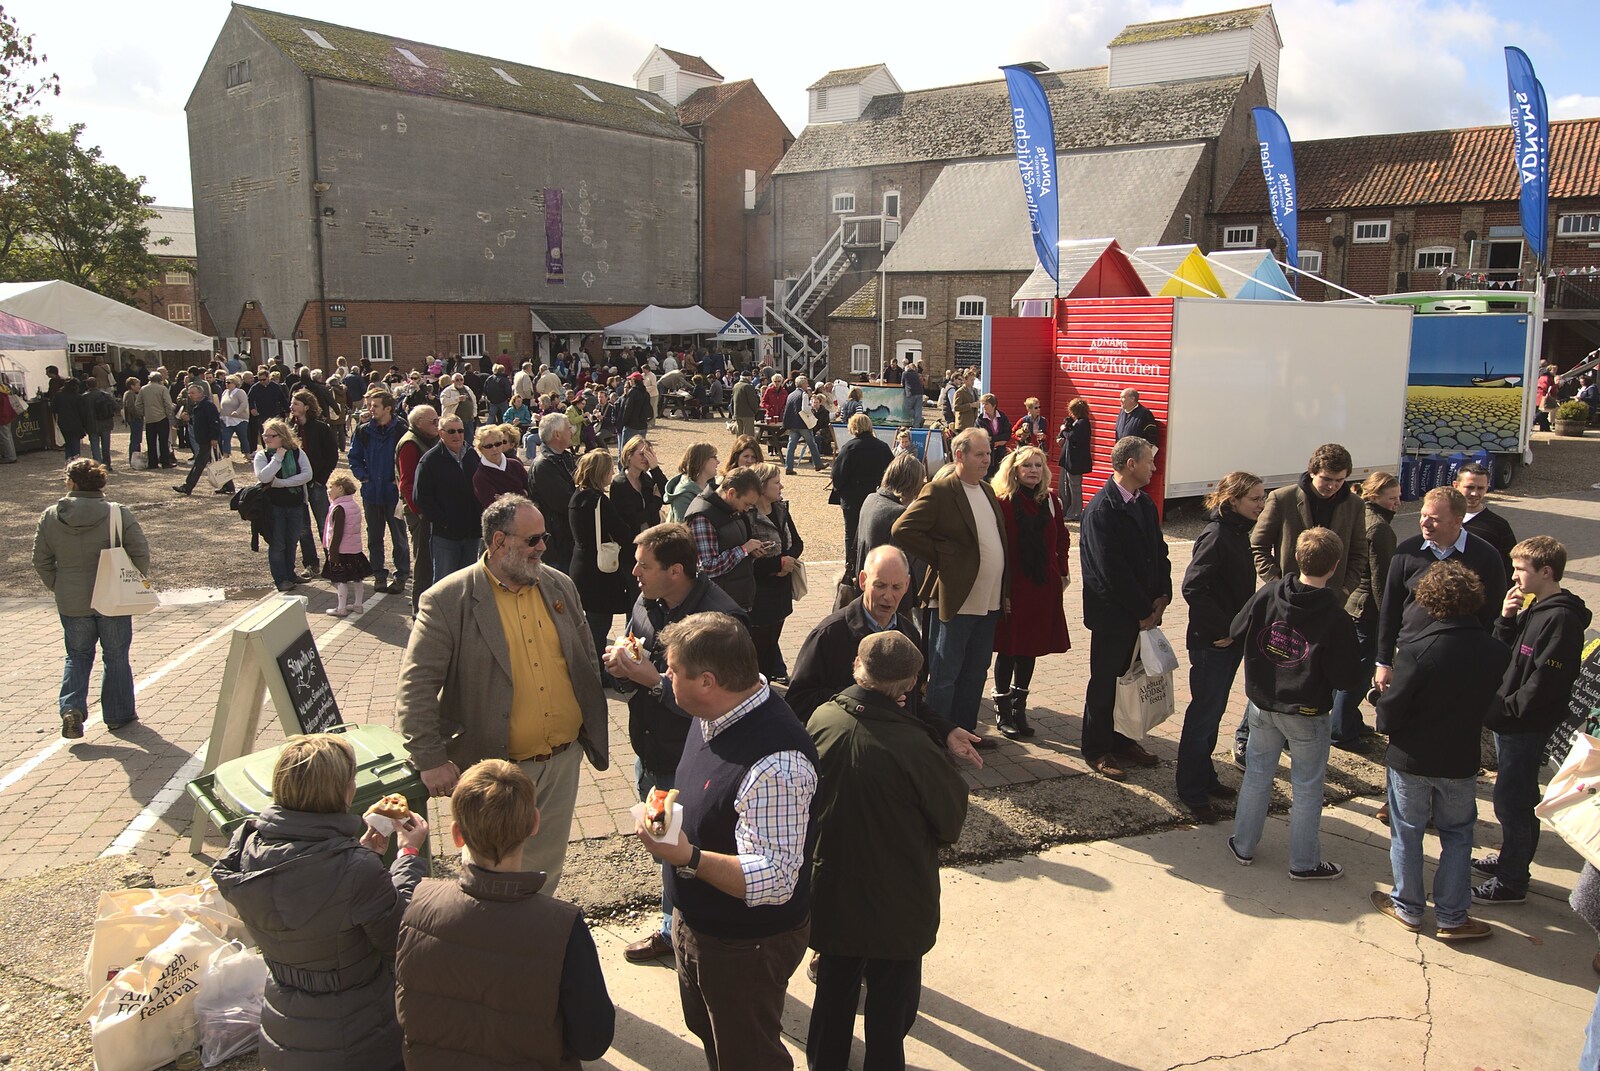 The Aldeburgh Food Festival, Snape Maltings, Suffolk - 25th September 2010: Crowds mill around